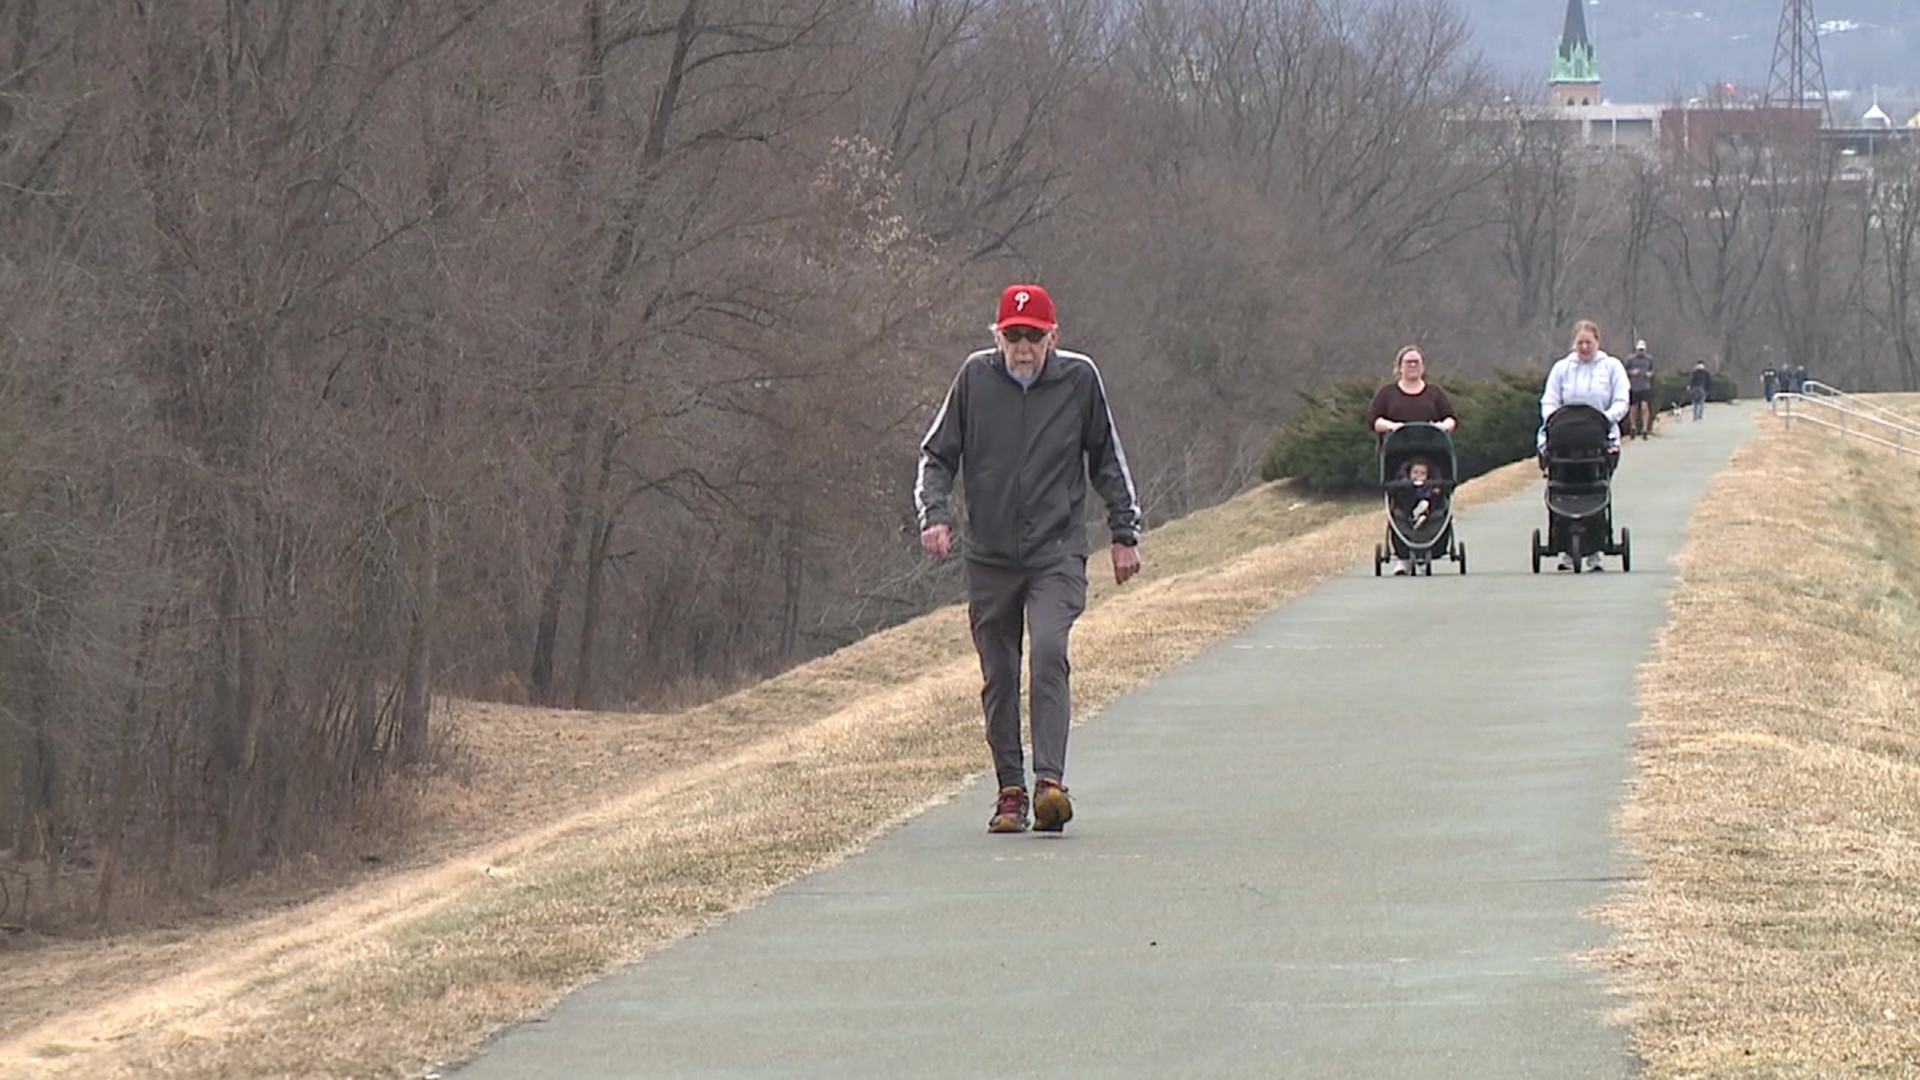 Folks took advantage of the warmer temperatures to get outside on the levee trail in Kingston.